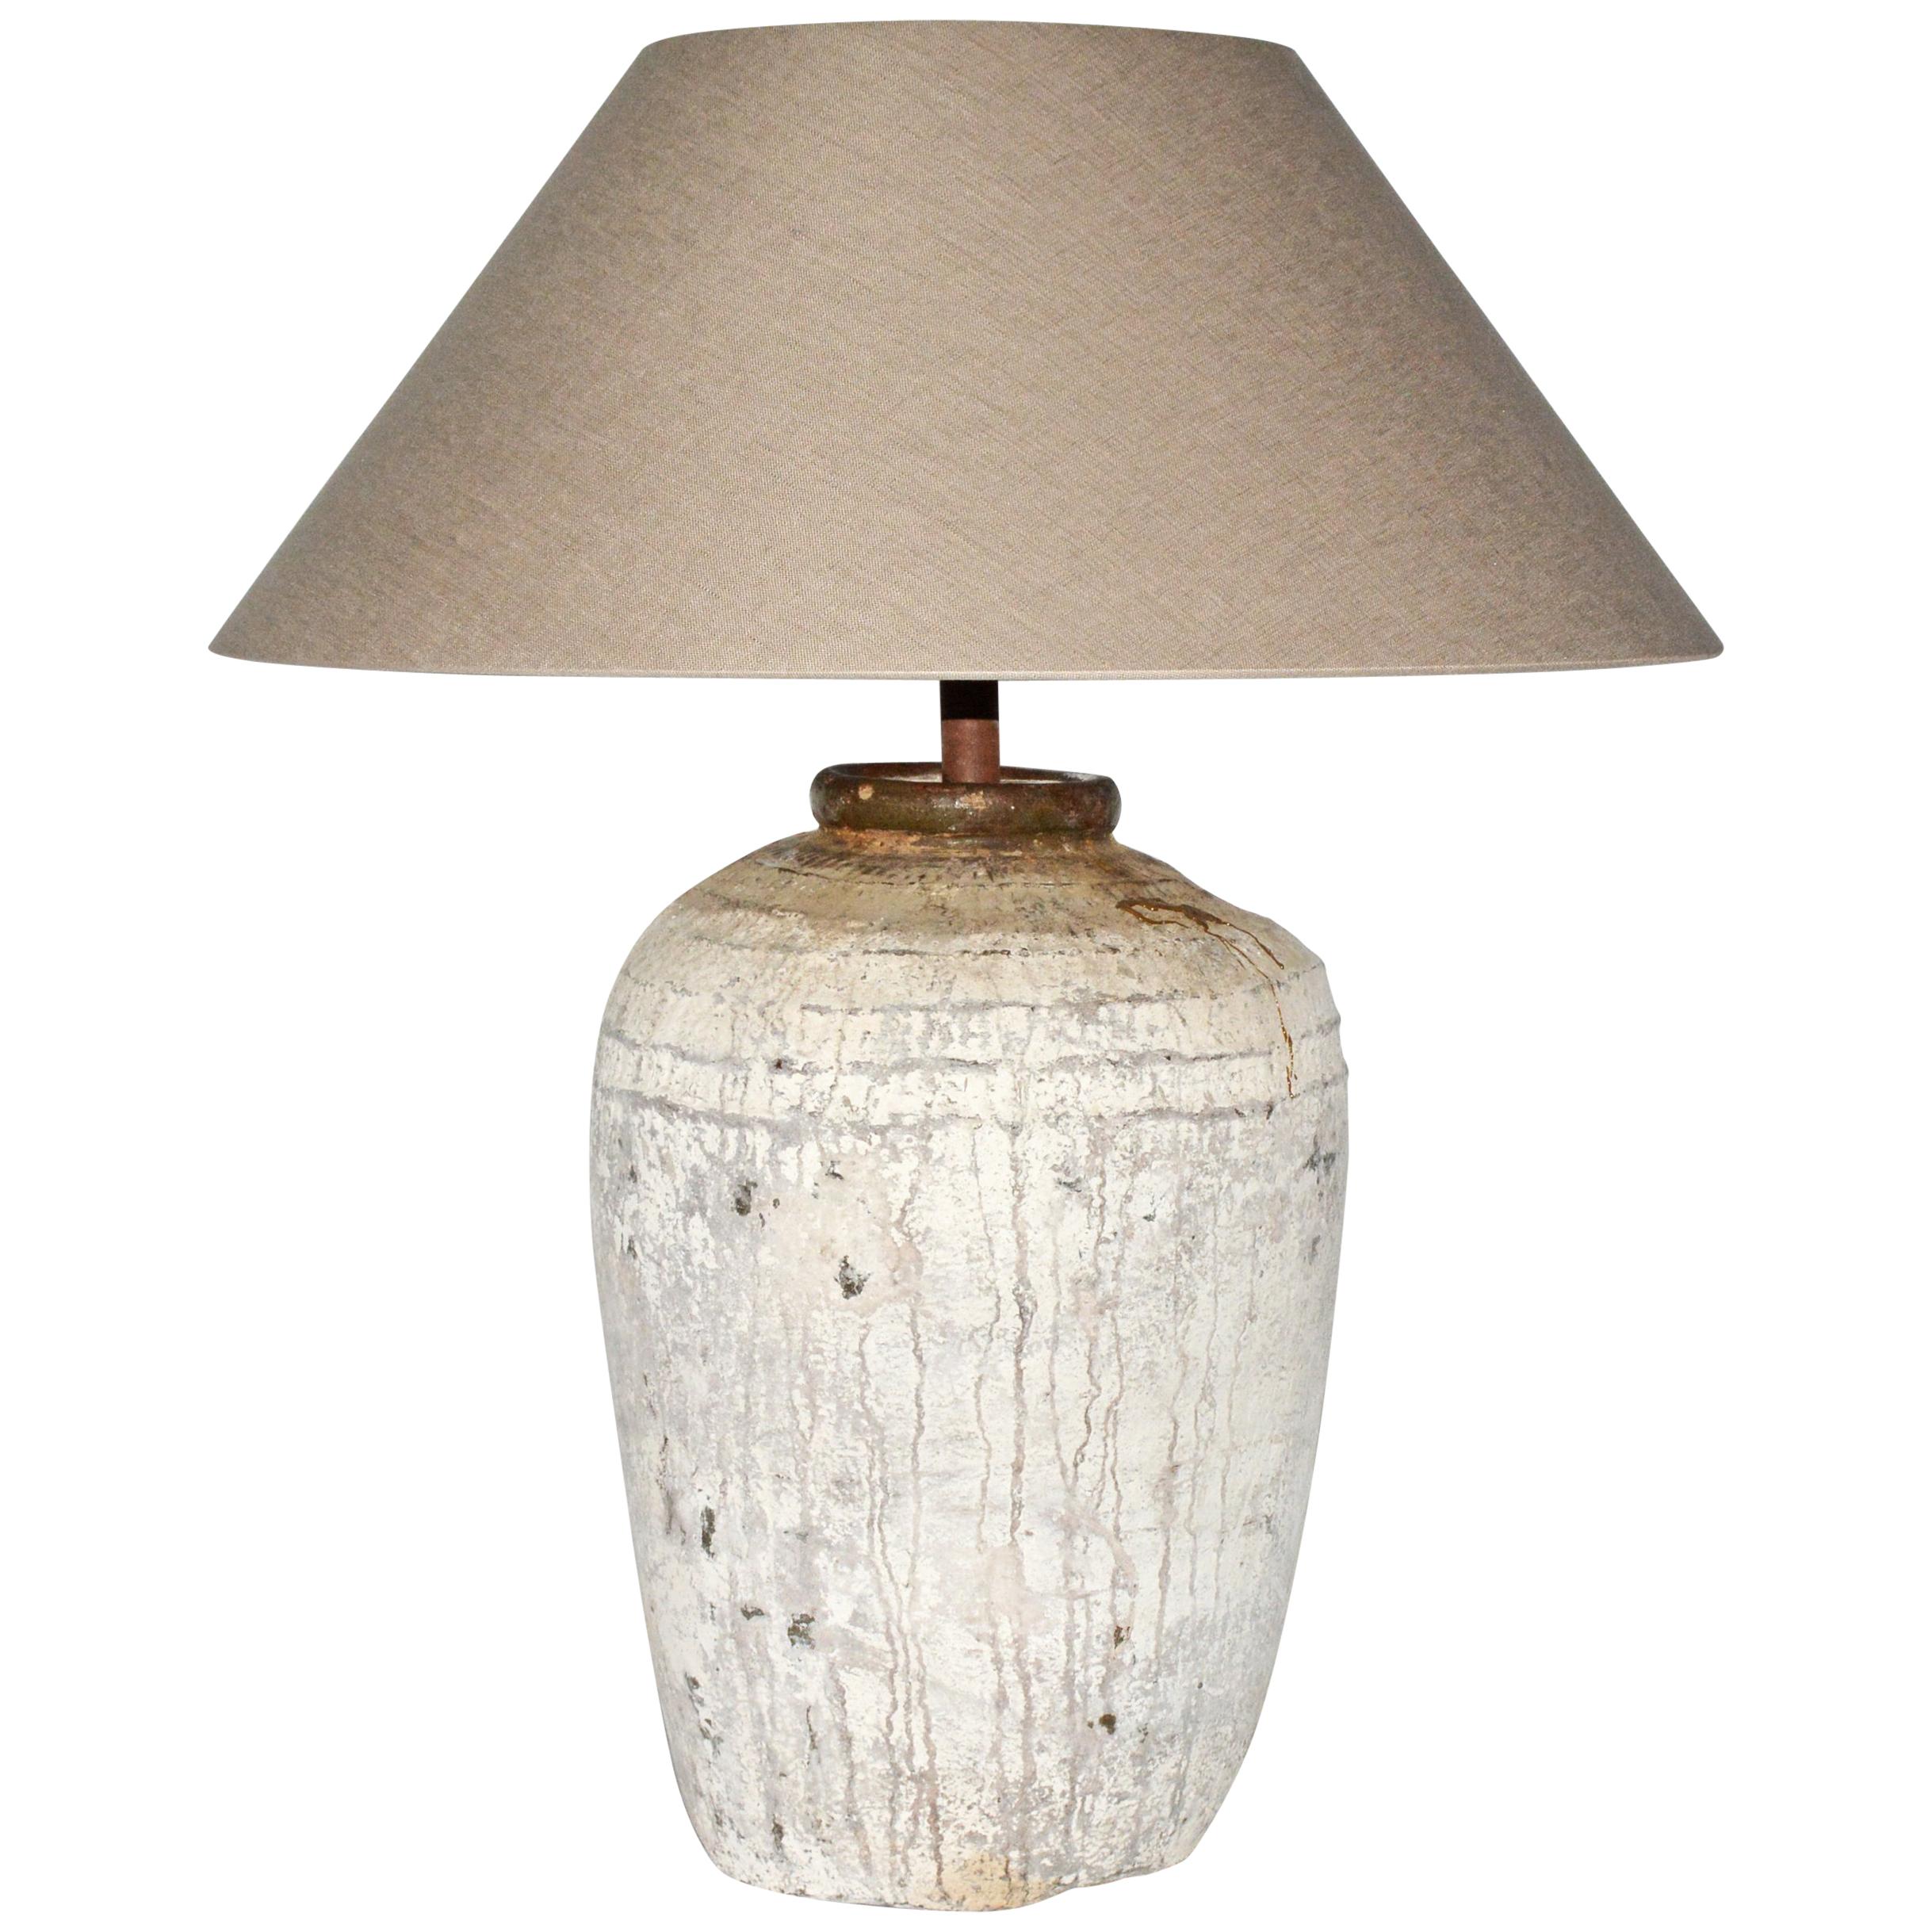 Large Rustic Chinese Storage Jar Lamp Base with Linen Shade